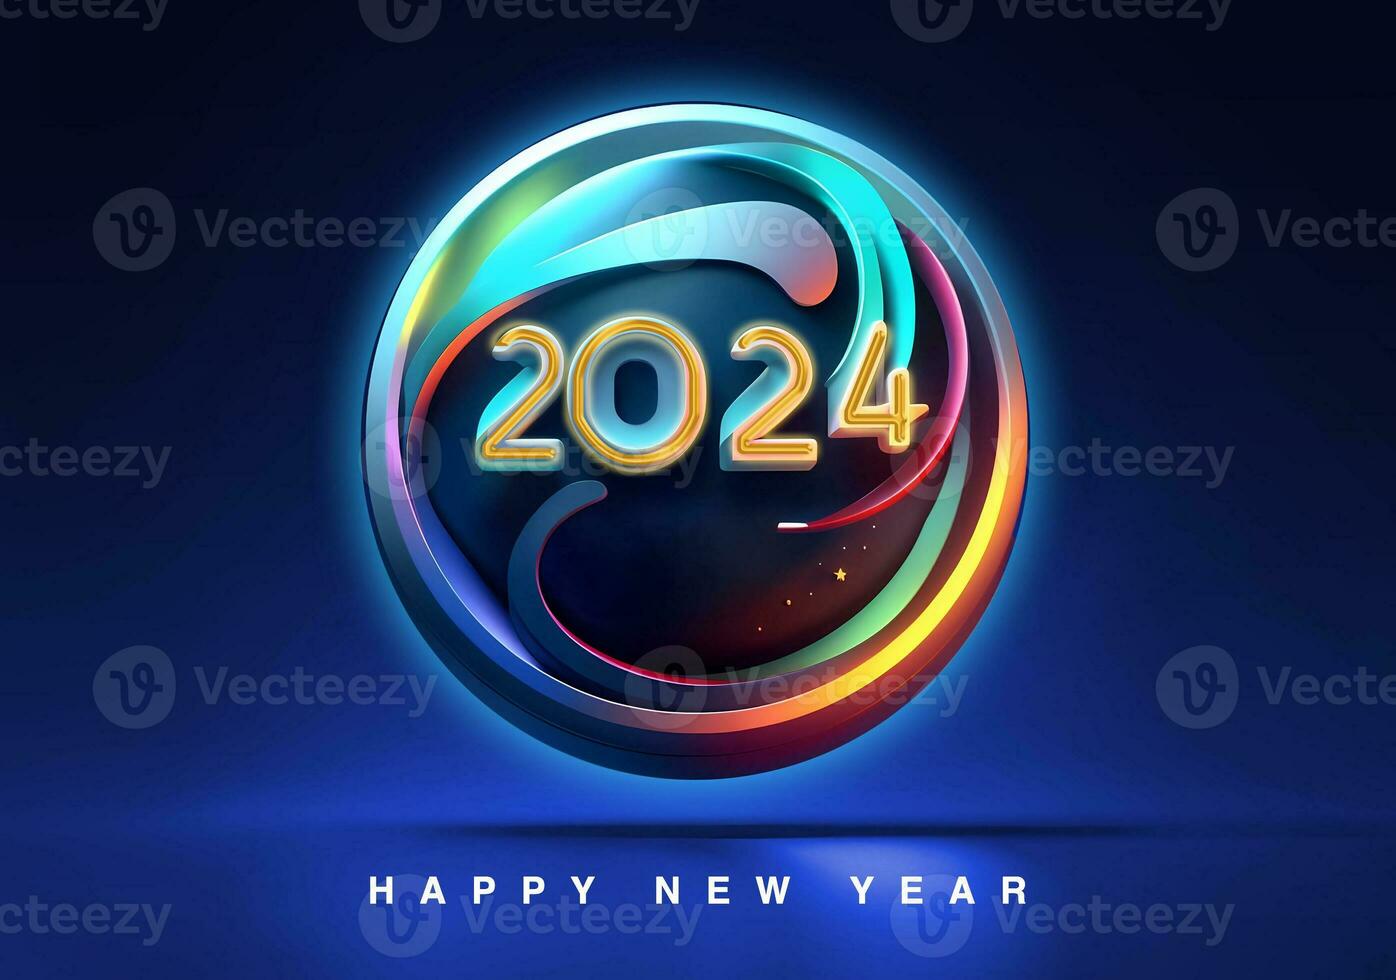 Happy new Year 2024 3D render Greetings Card simple illustration elegant luxurious card design photo